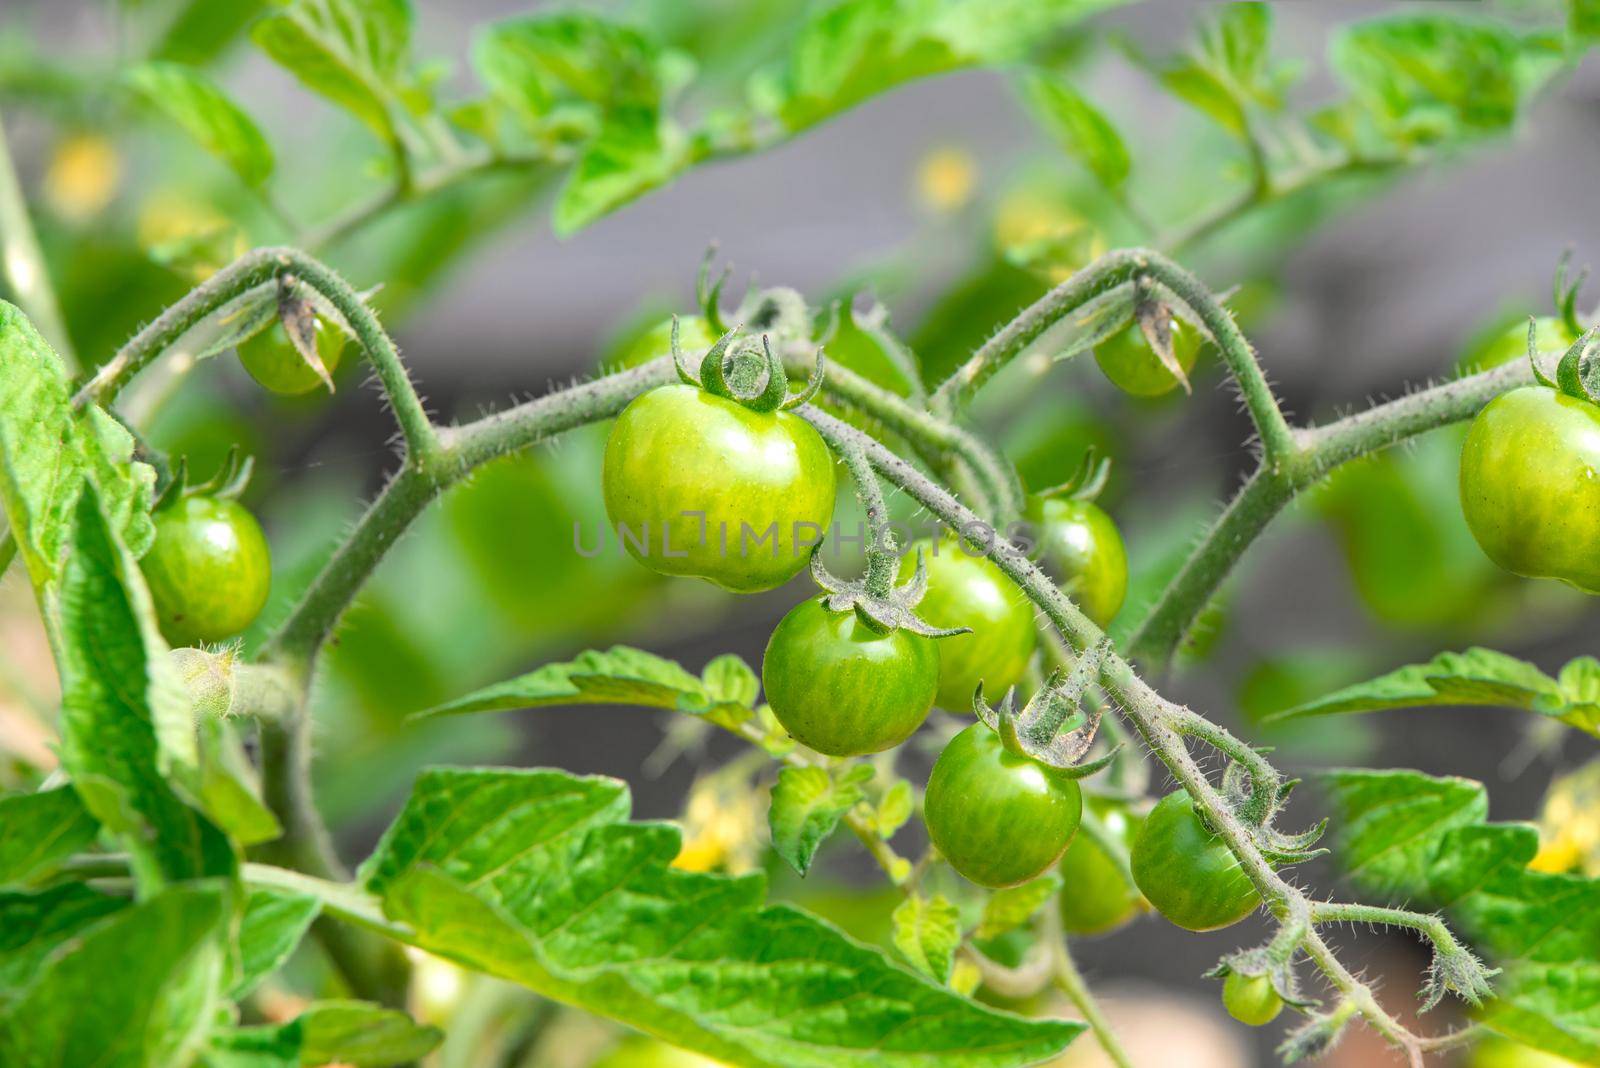 Bush of young tomatoes by wdnet_studio